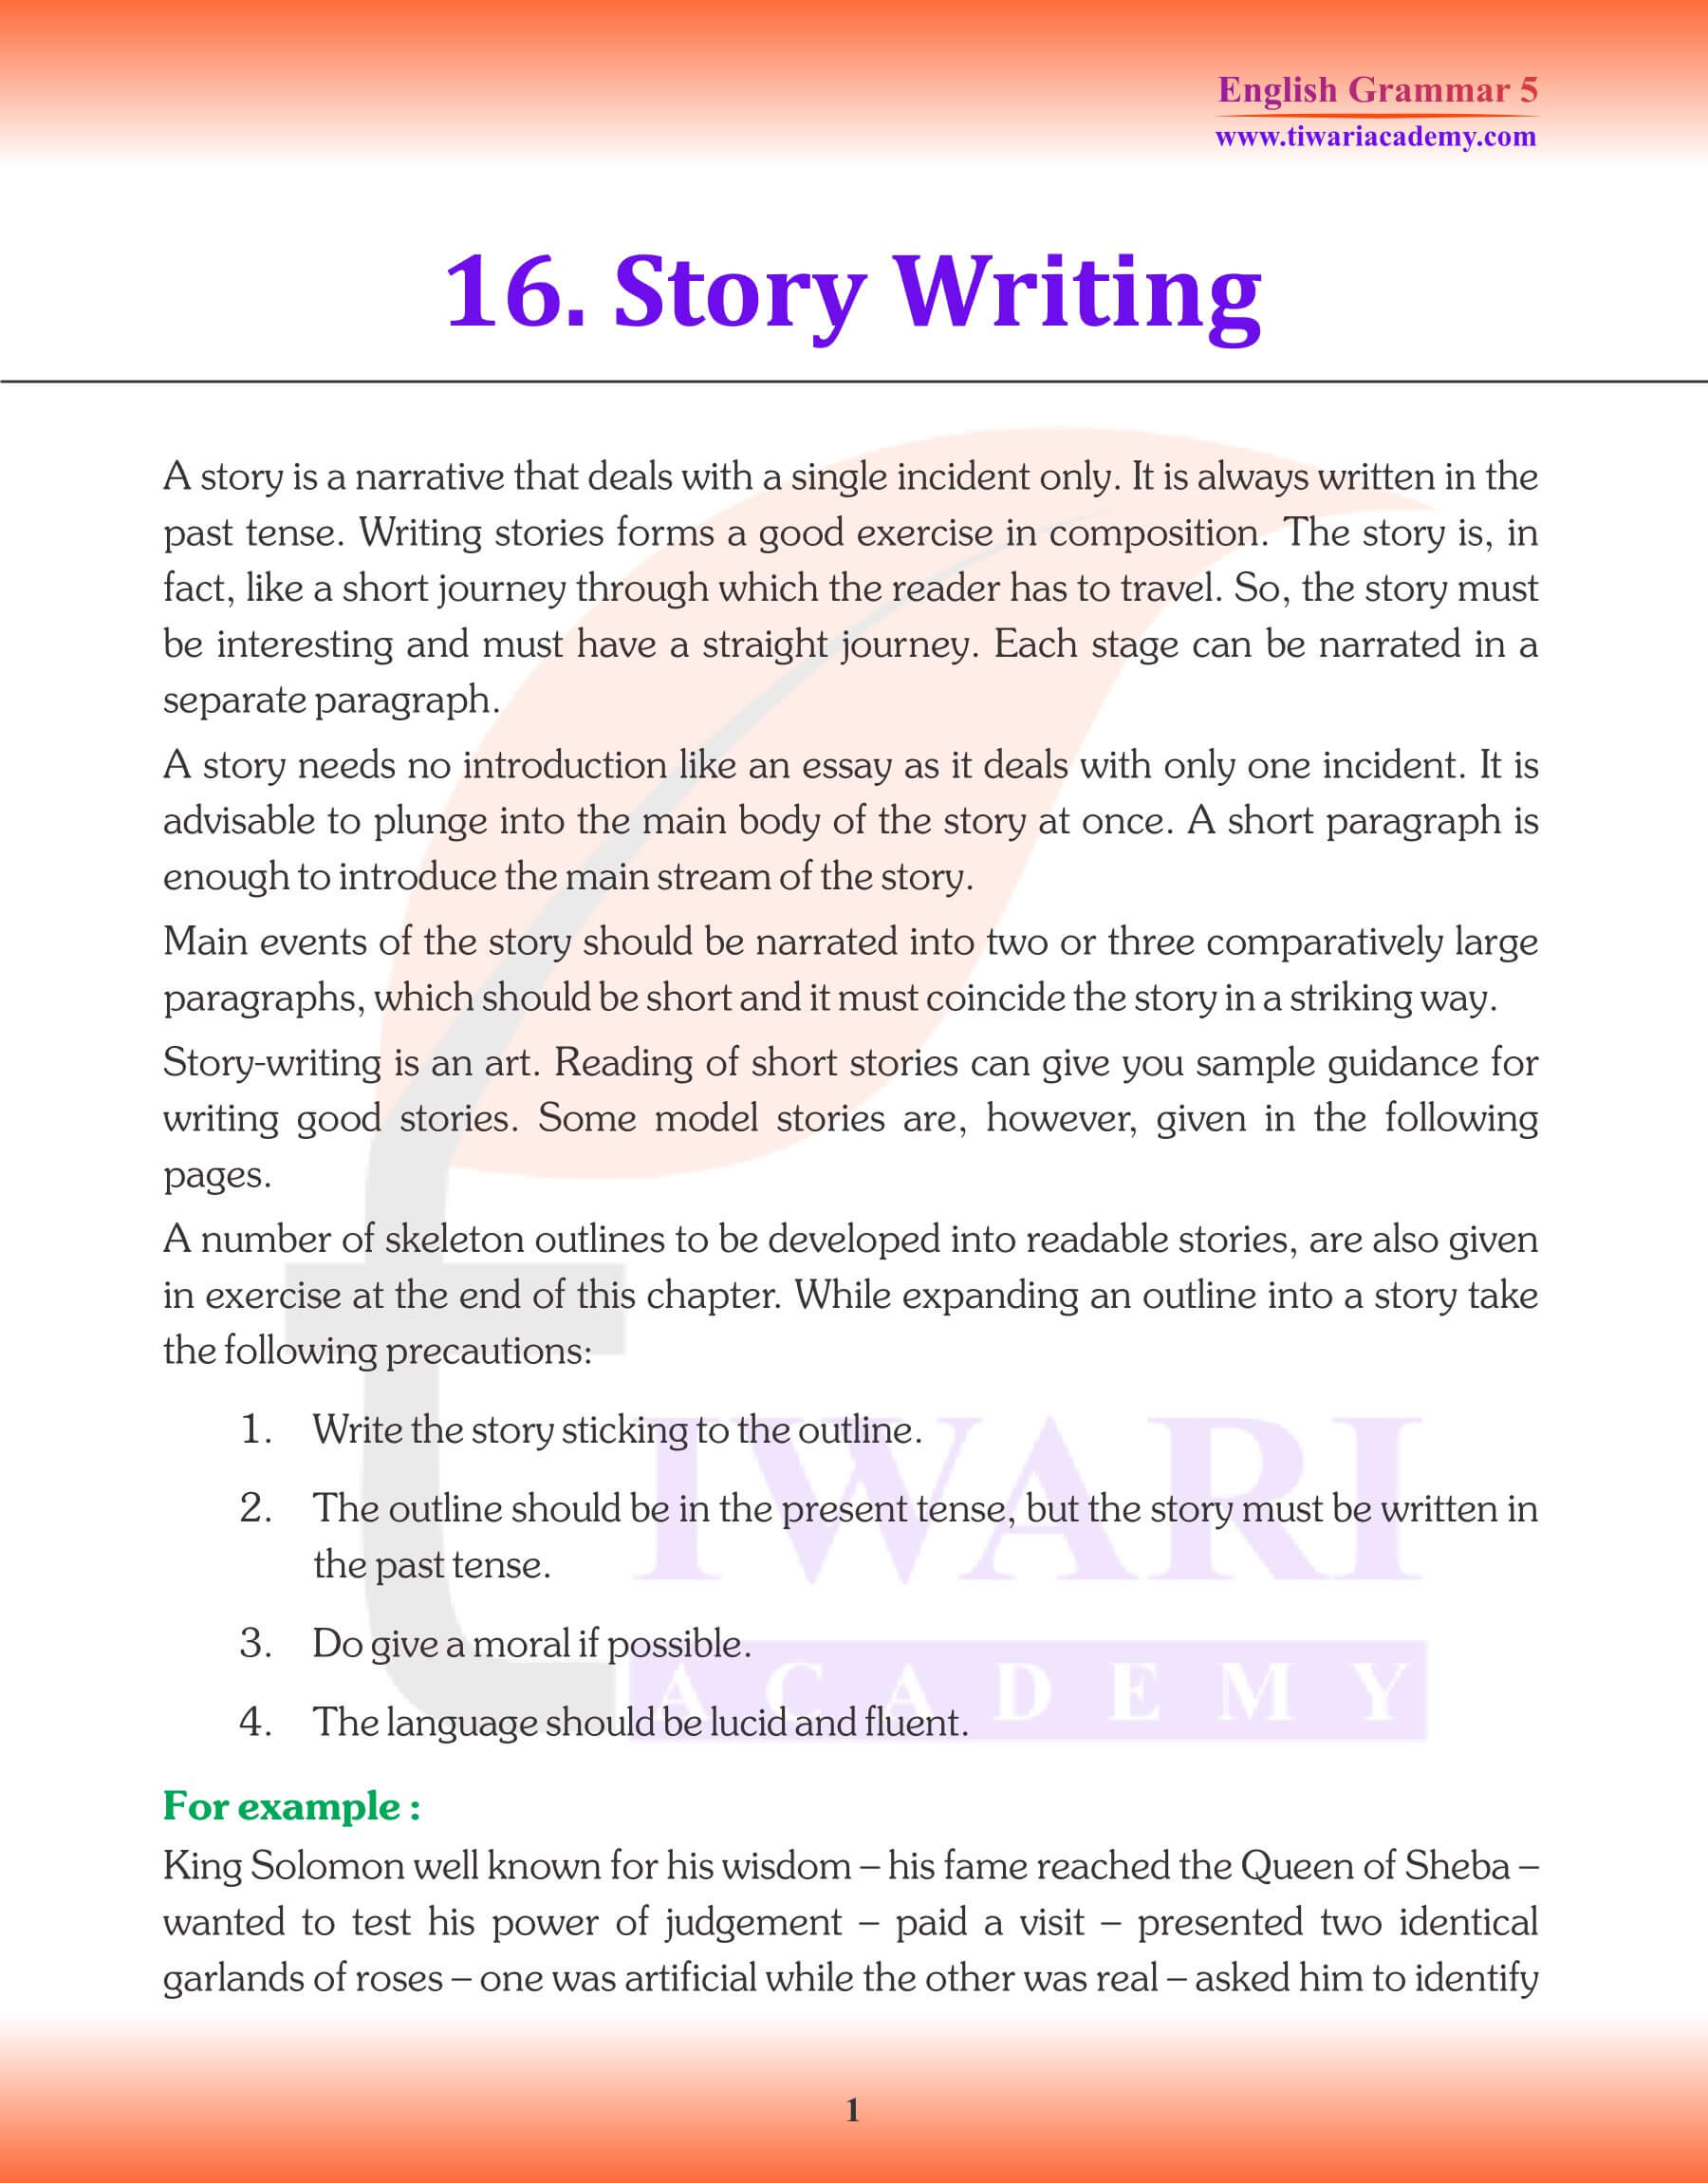 Class 5 English Grammar Story Writing Revision Book